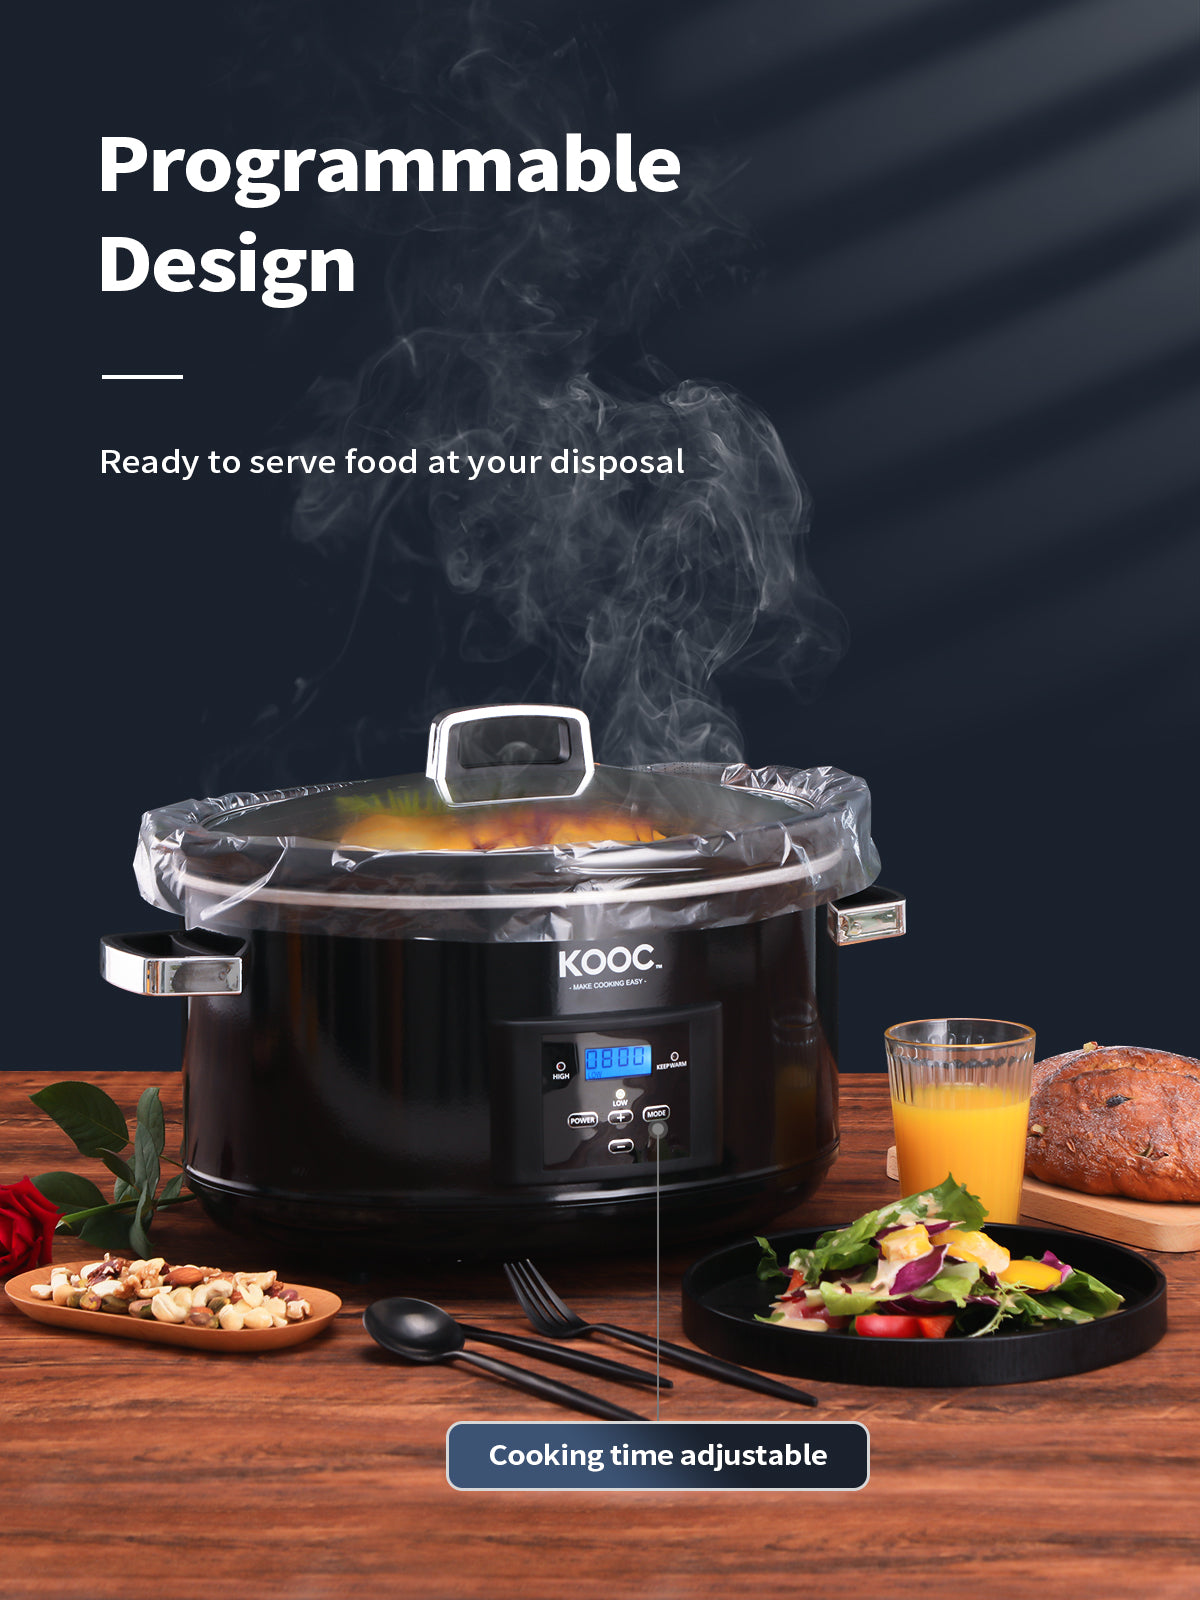 KOOC - Premium Programmable Slow Cooker - 8.5 Quart, with Free Liners